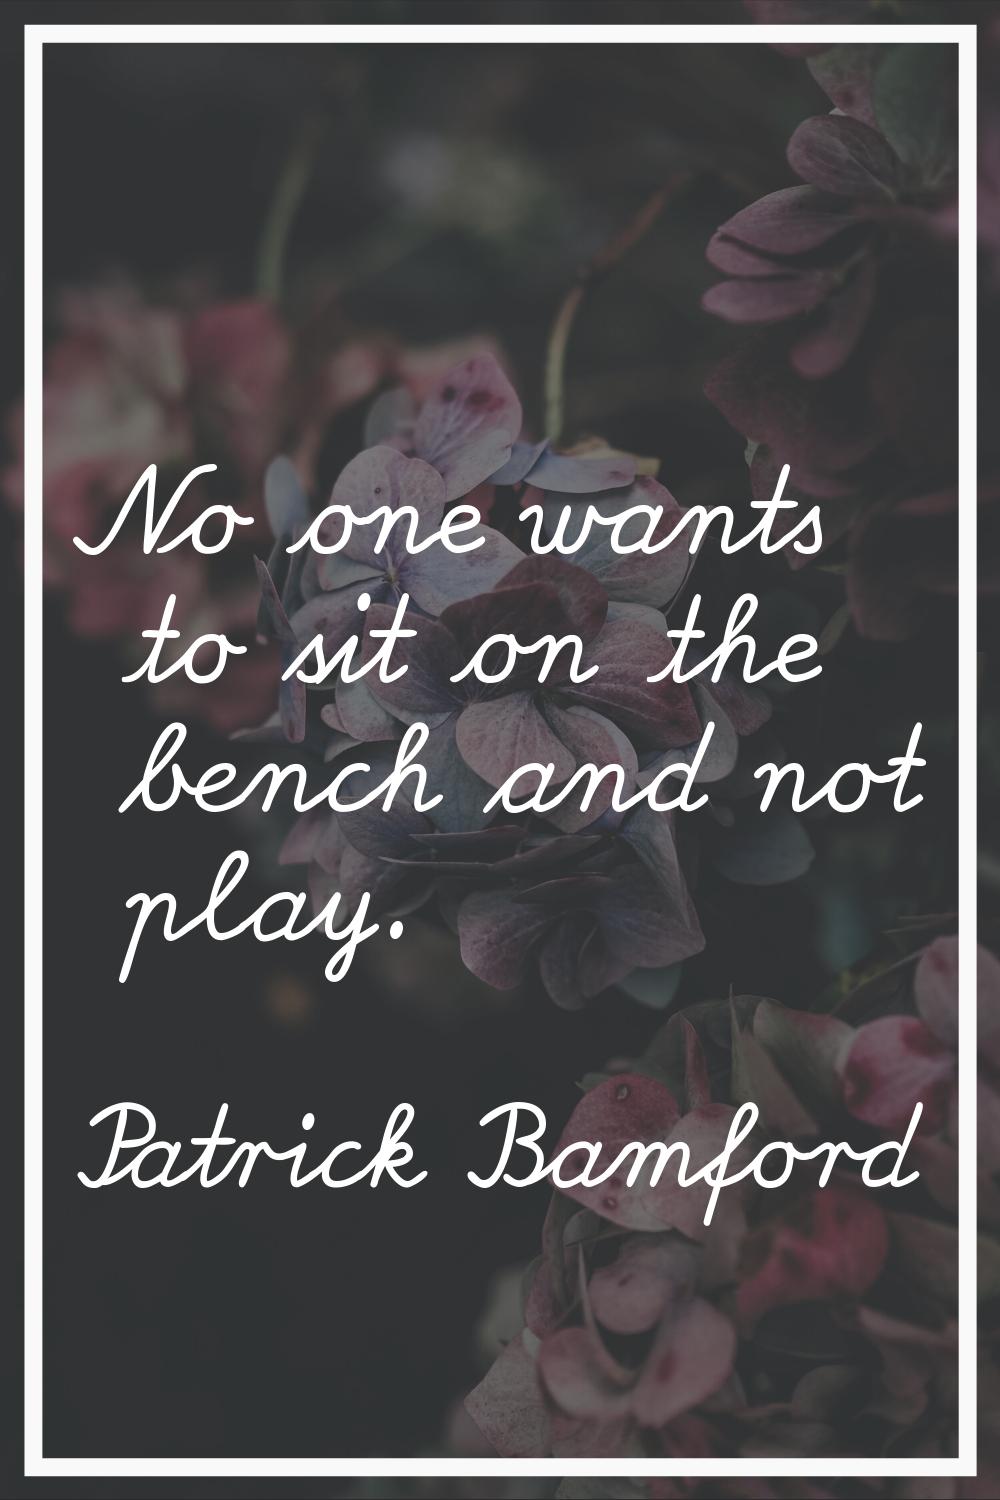 No one wants to sit on the bench and not play.